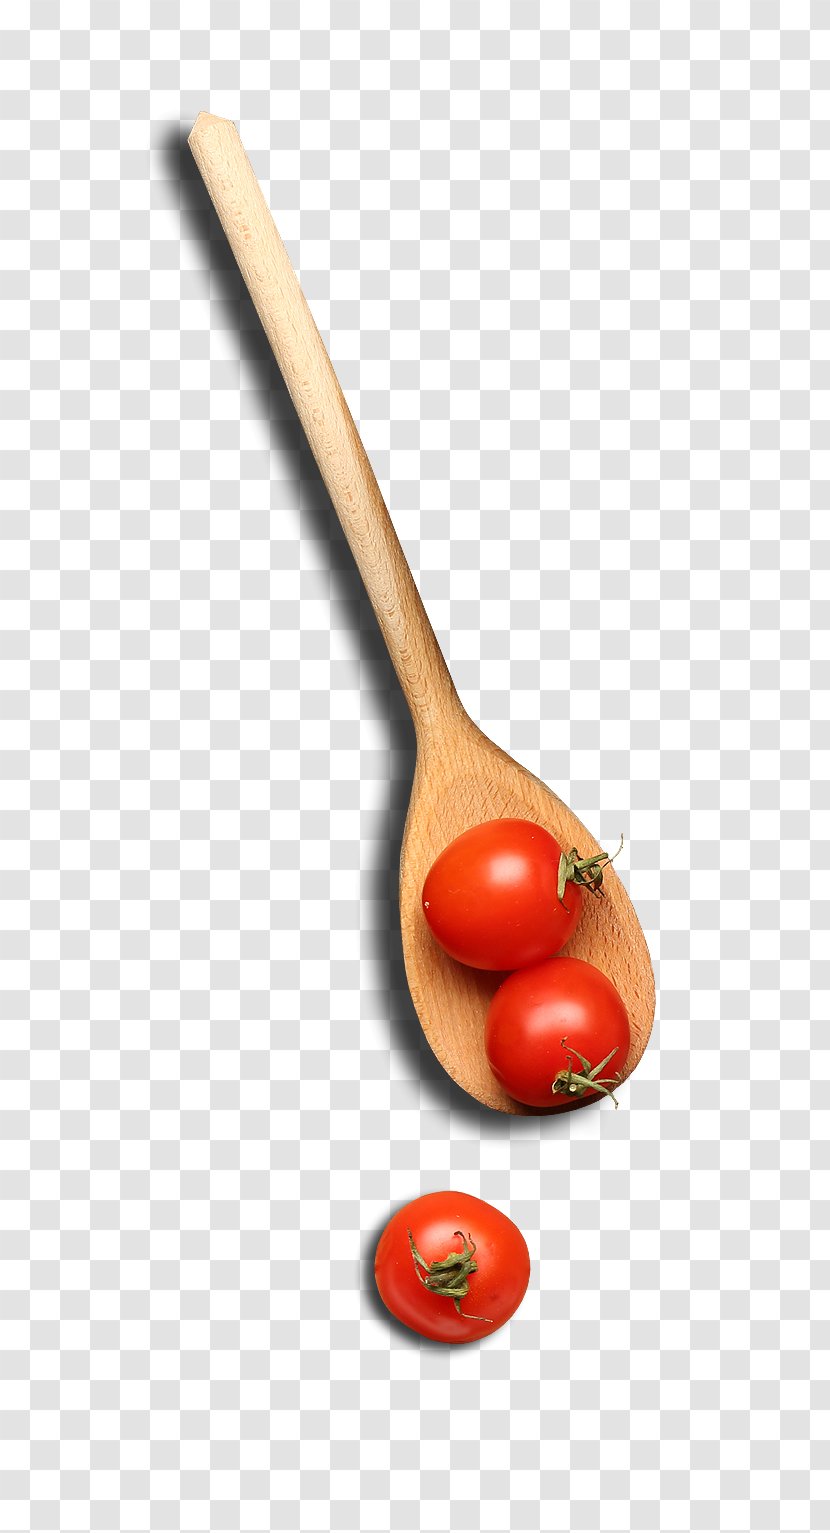 Wooden Spoon Download Google Images - And Cherry Tomatoes Transparent PNG